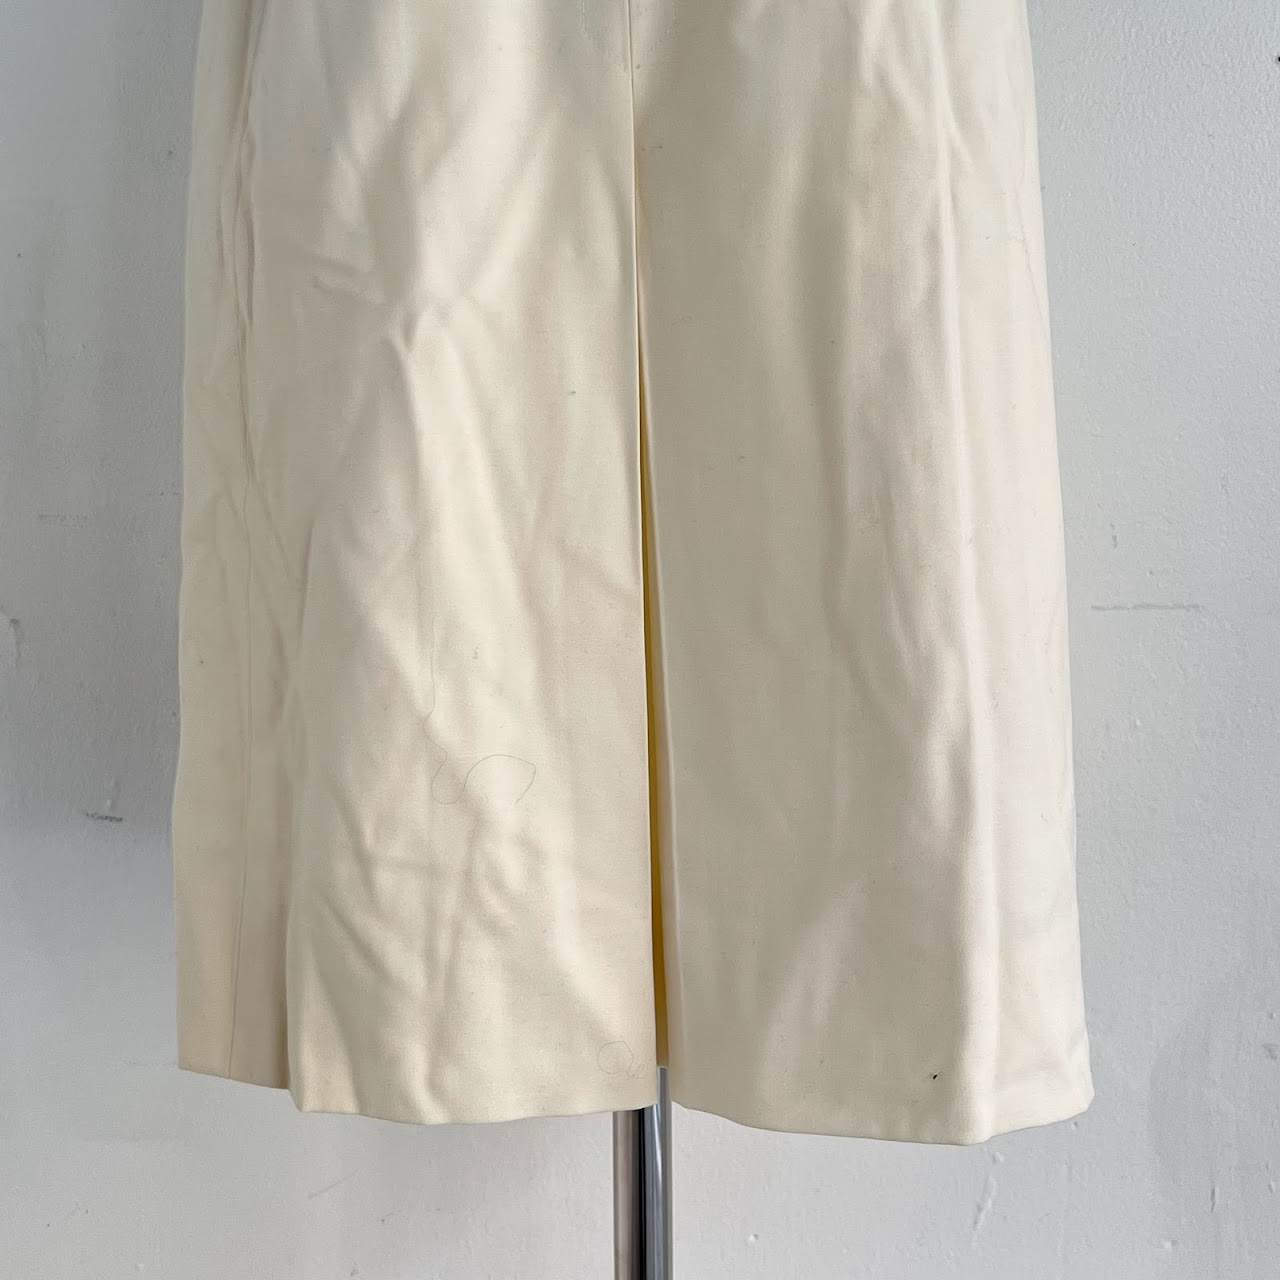 Givenchy Nouvelle Boutique Vintage Cream Colored Pleated Skirt